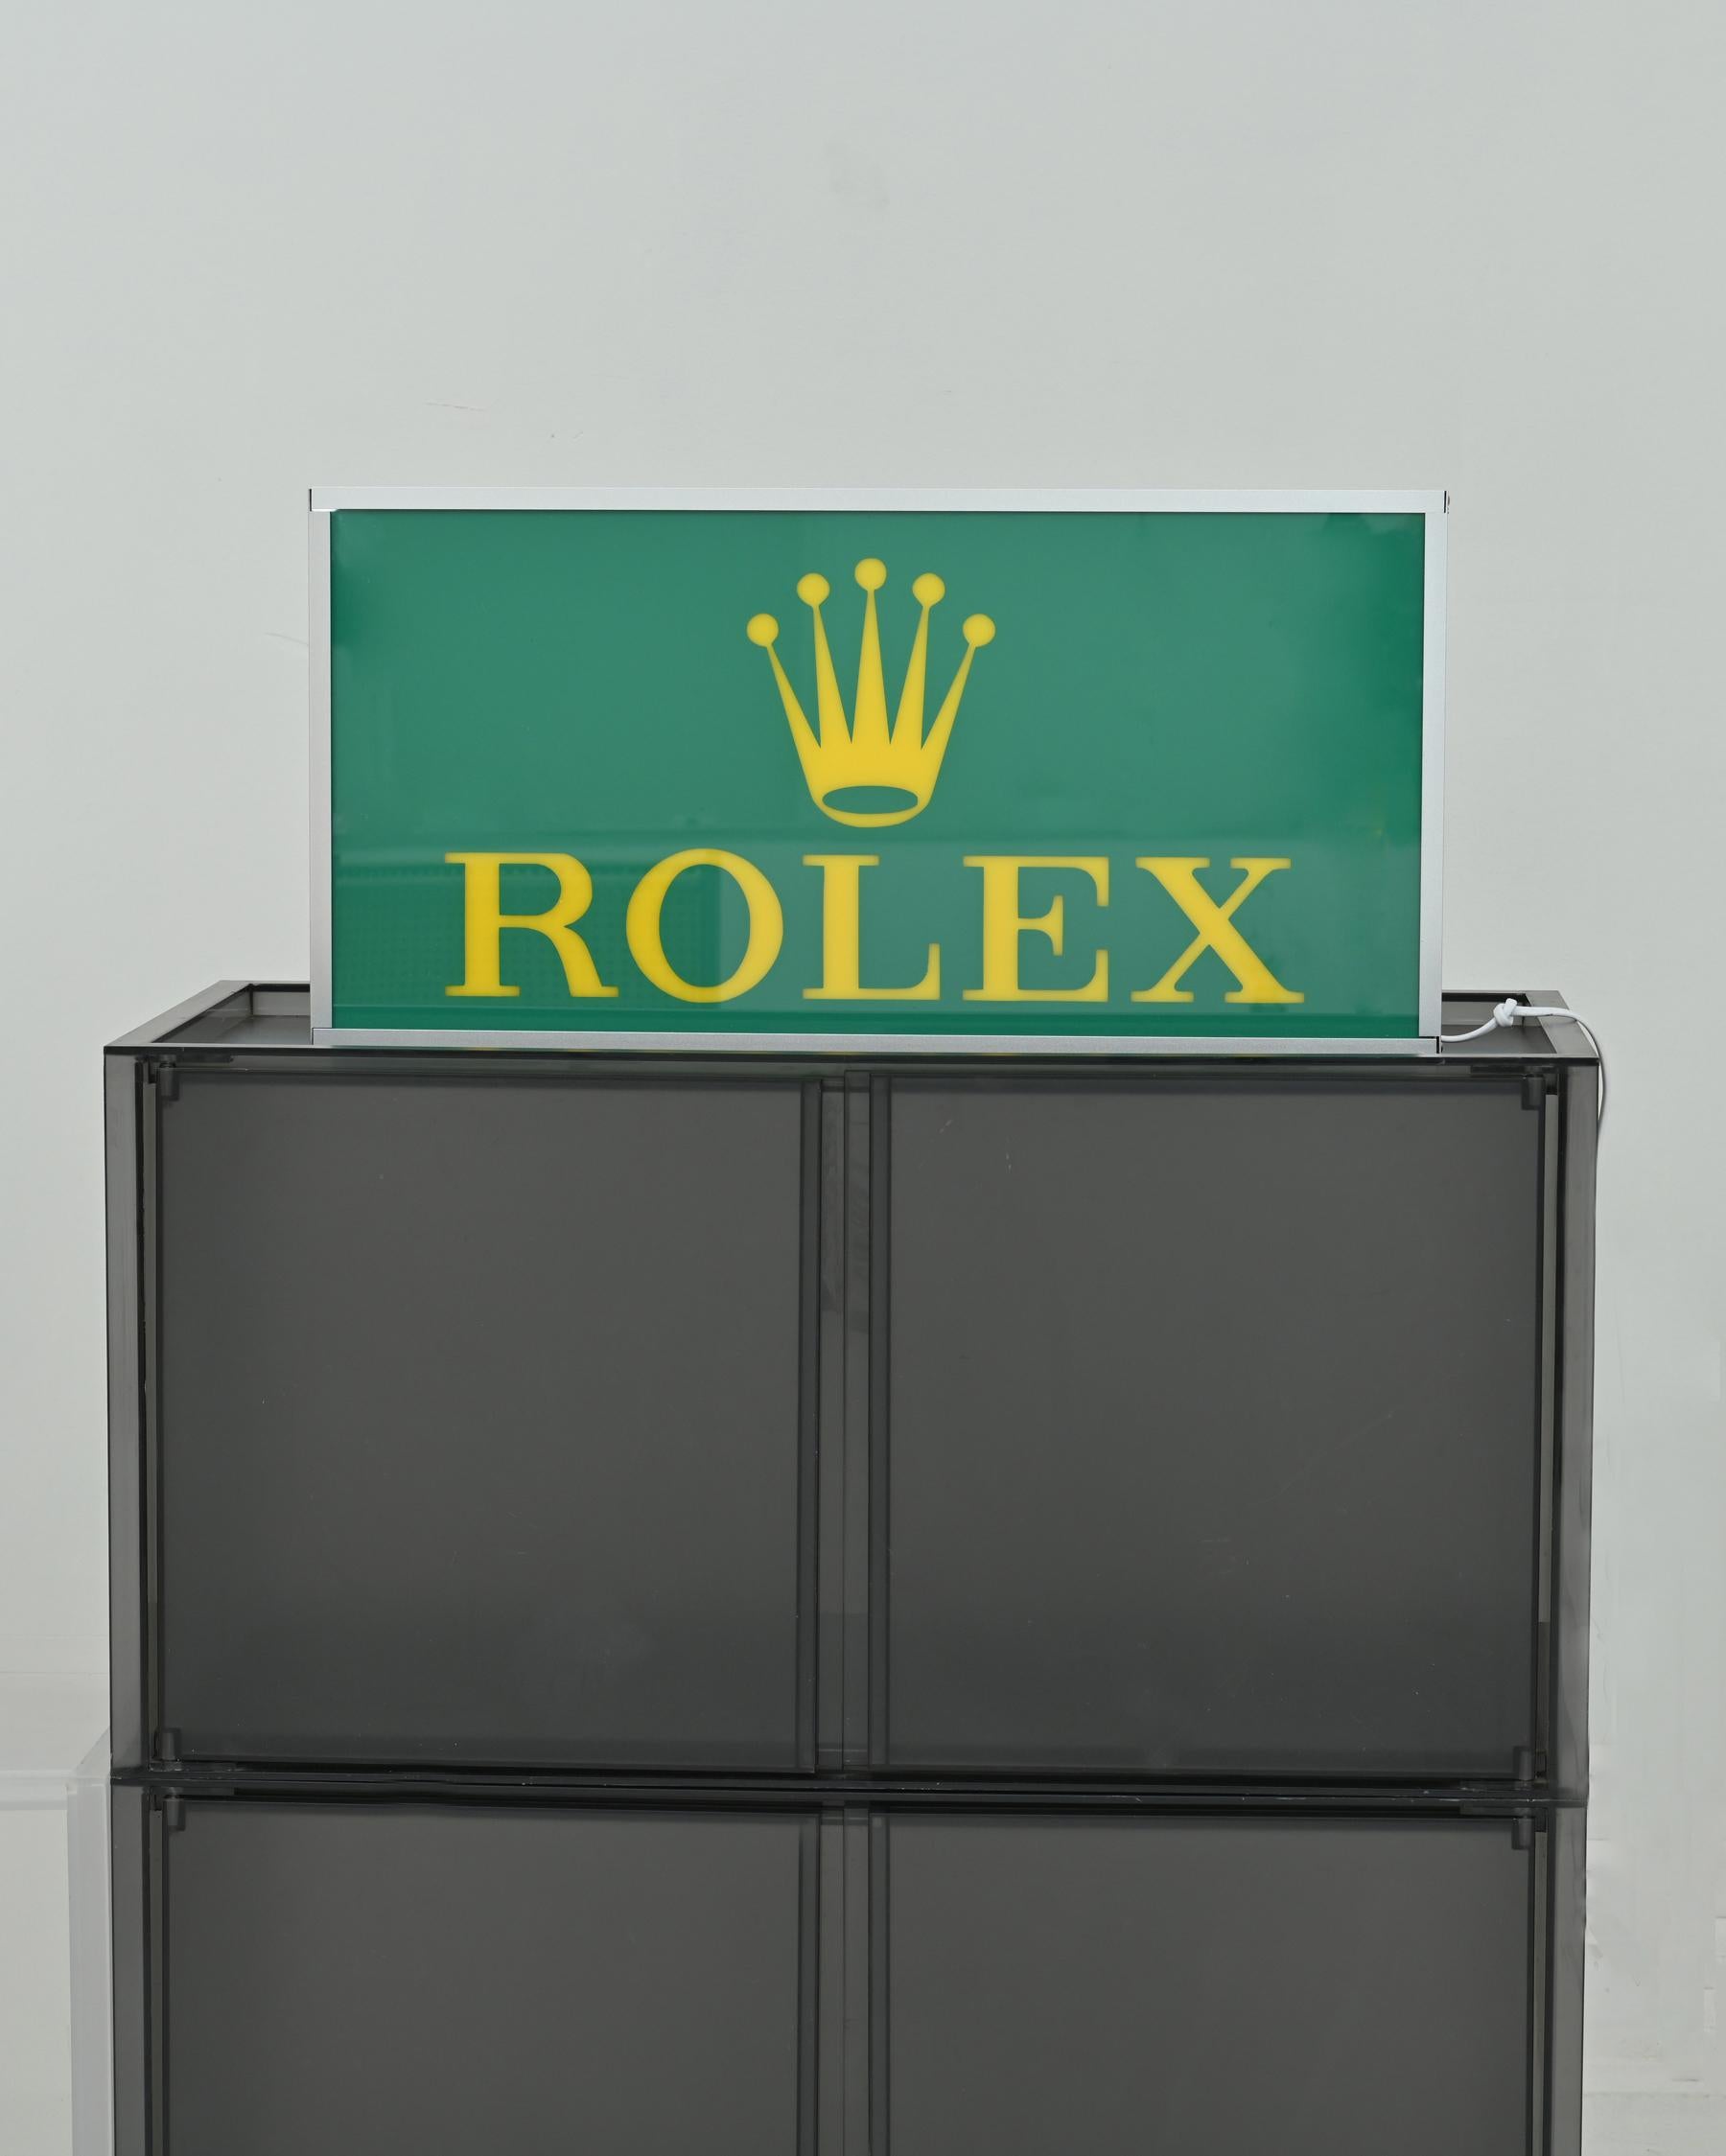 Swiss 1990s ROLEX Advertising Signage with Yellow Lighting